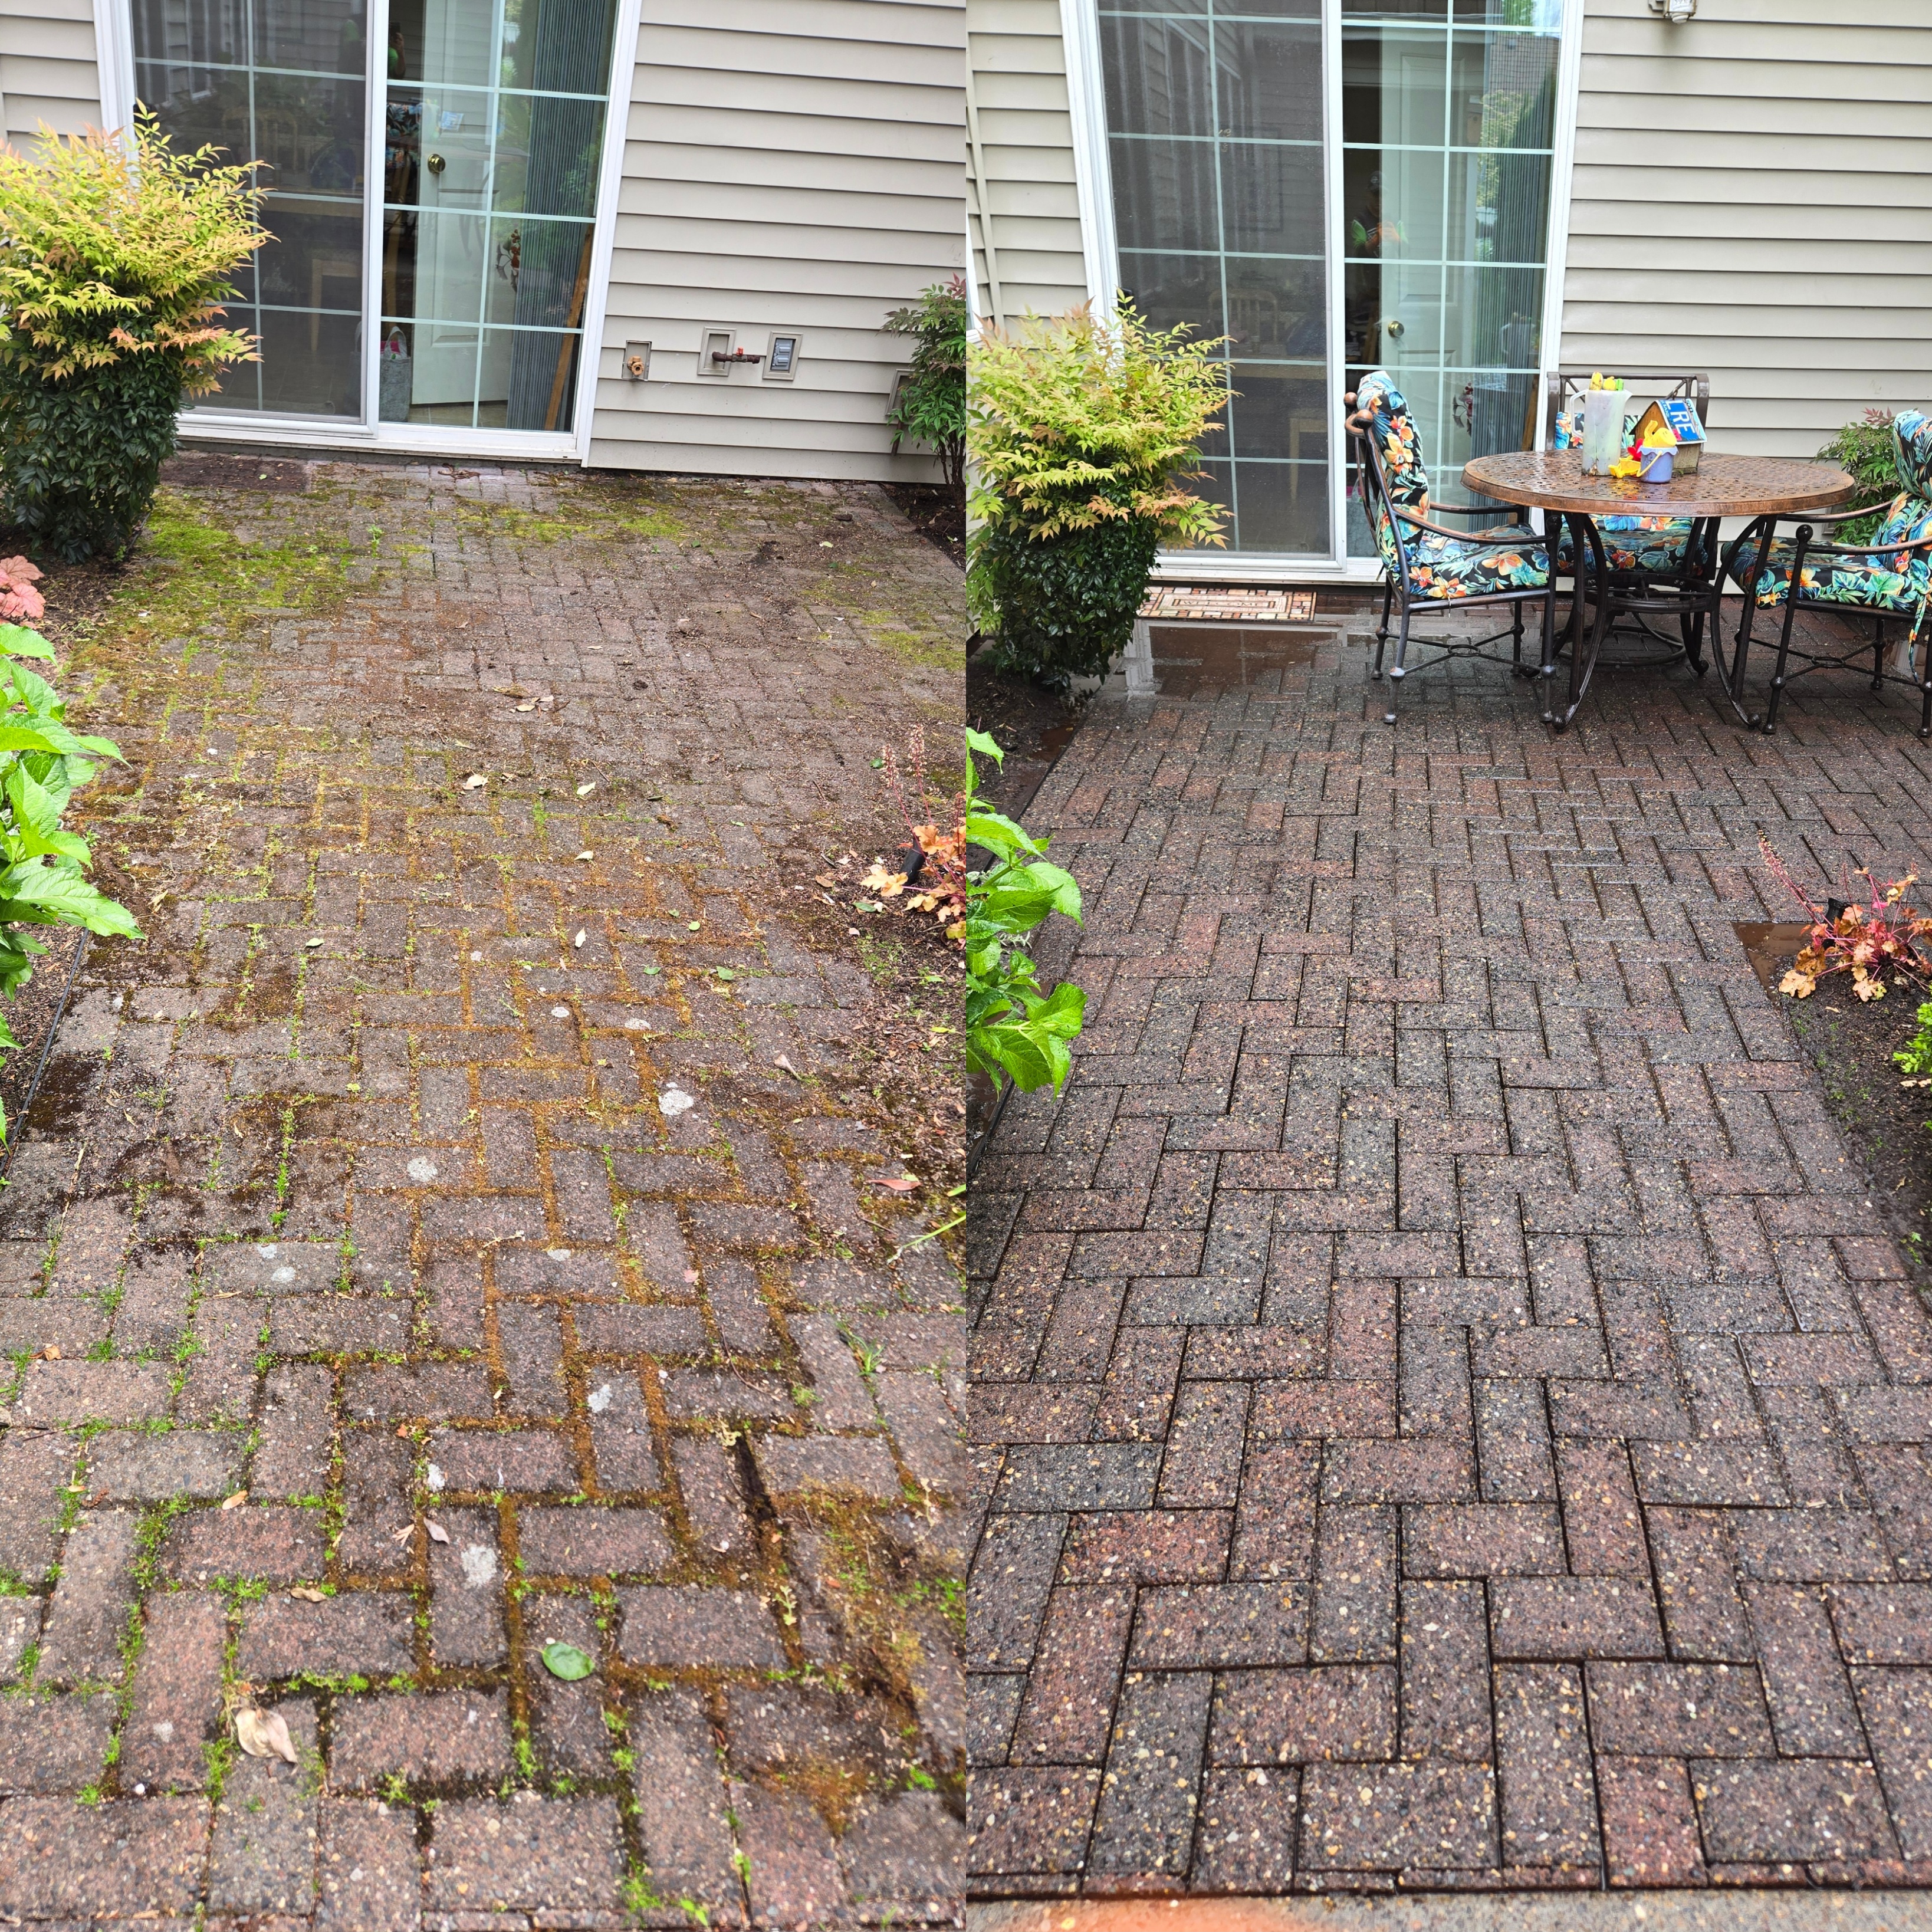 5 Star Paver Patio Cleaning In Eugene Oregon